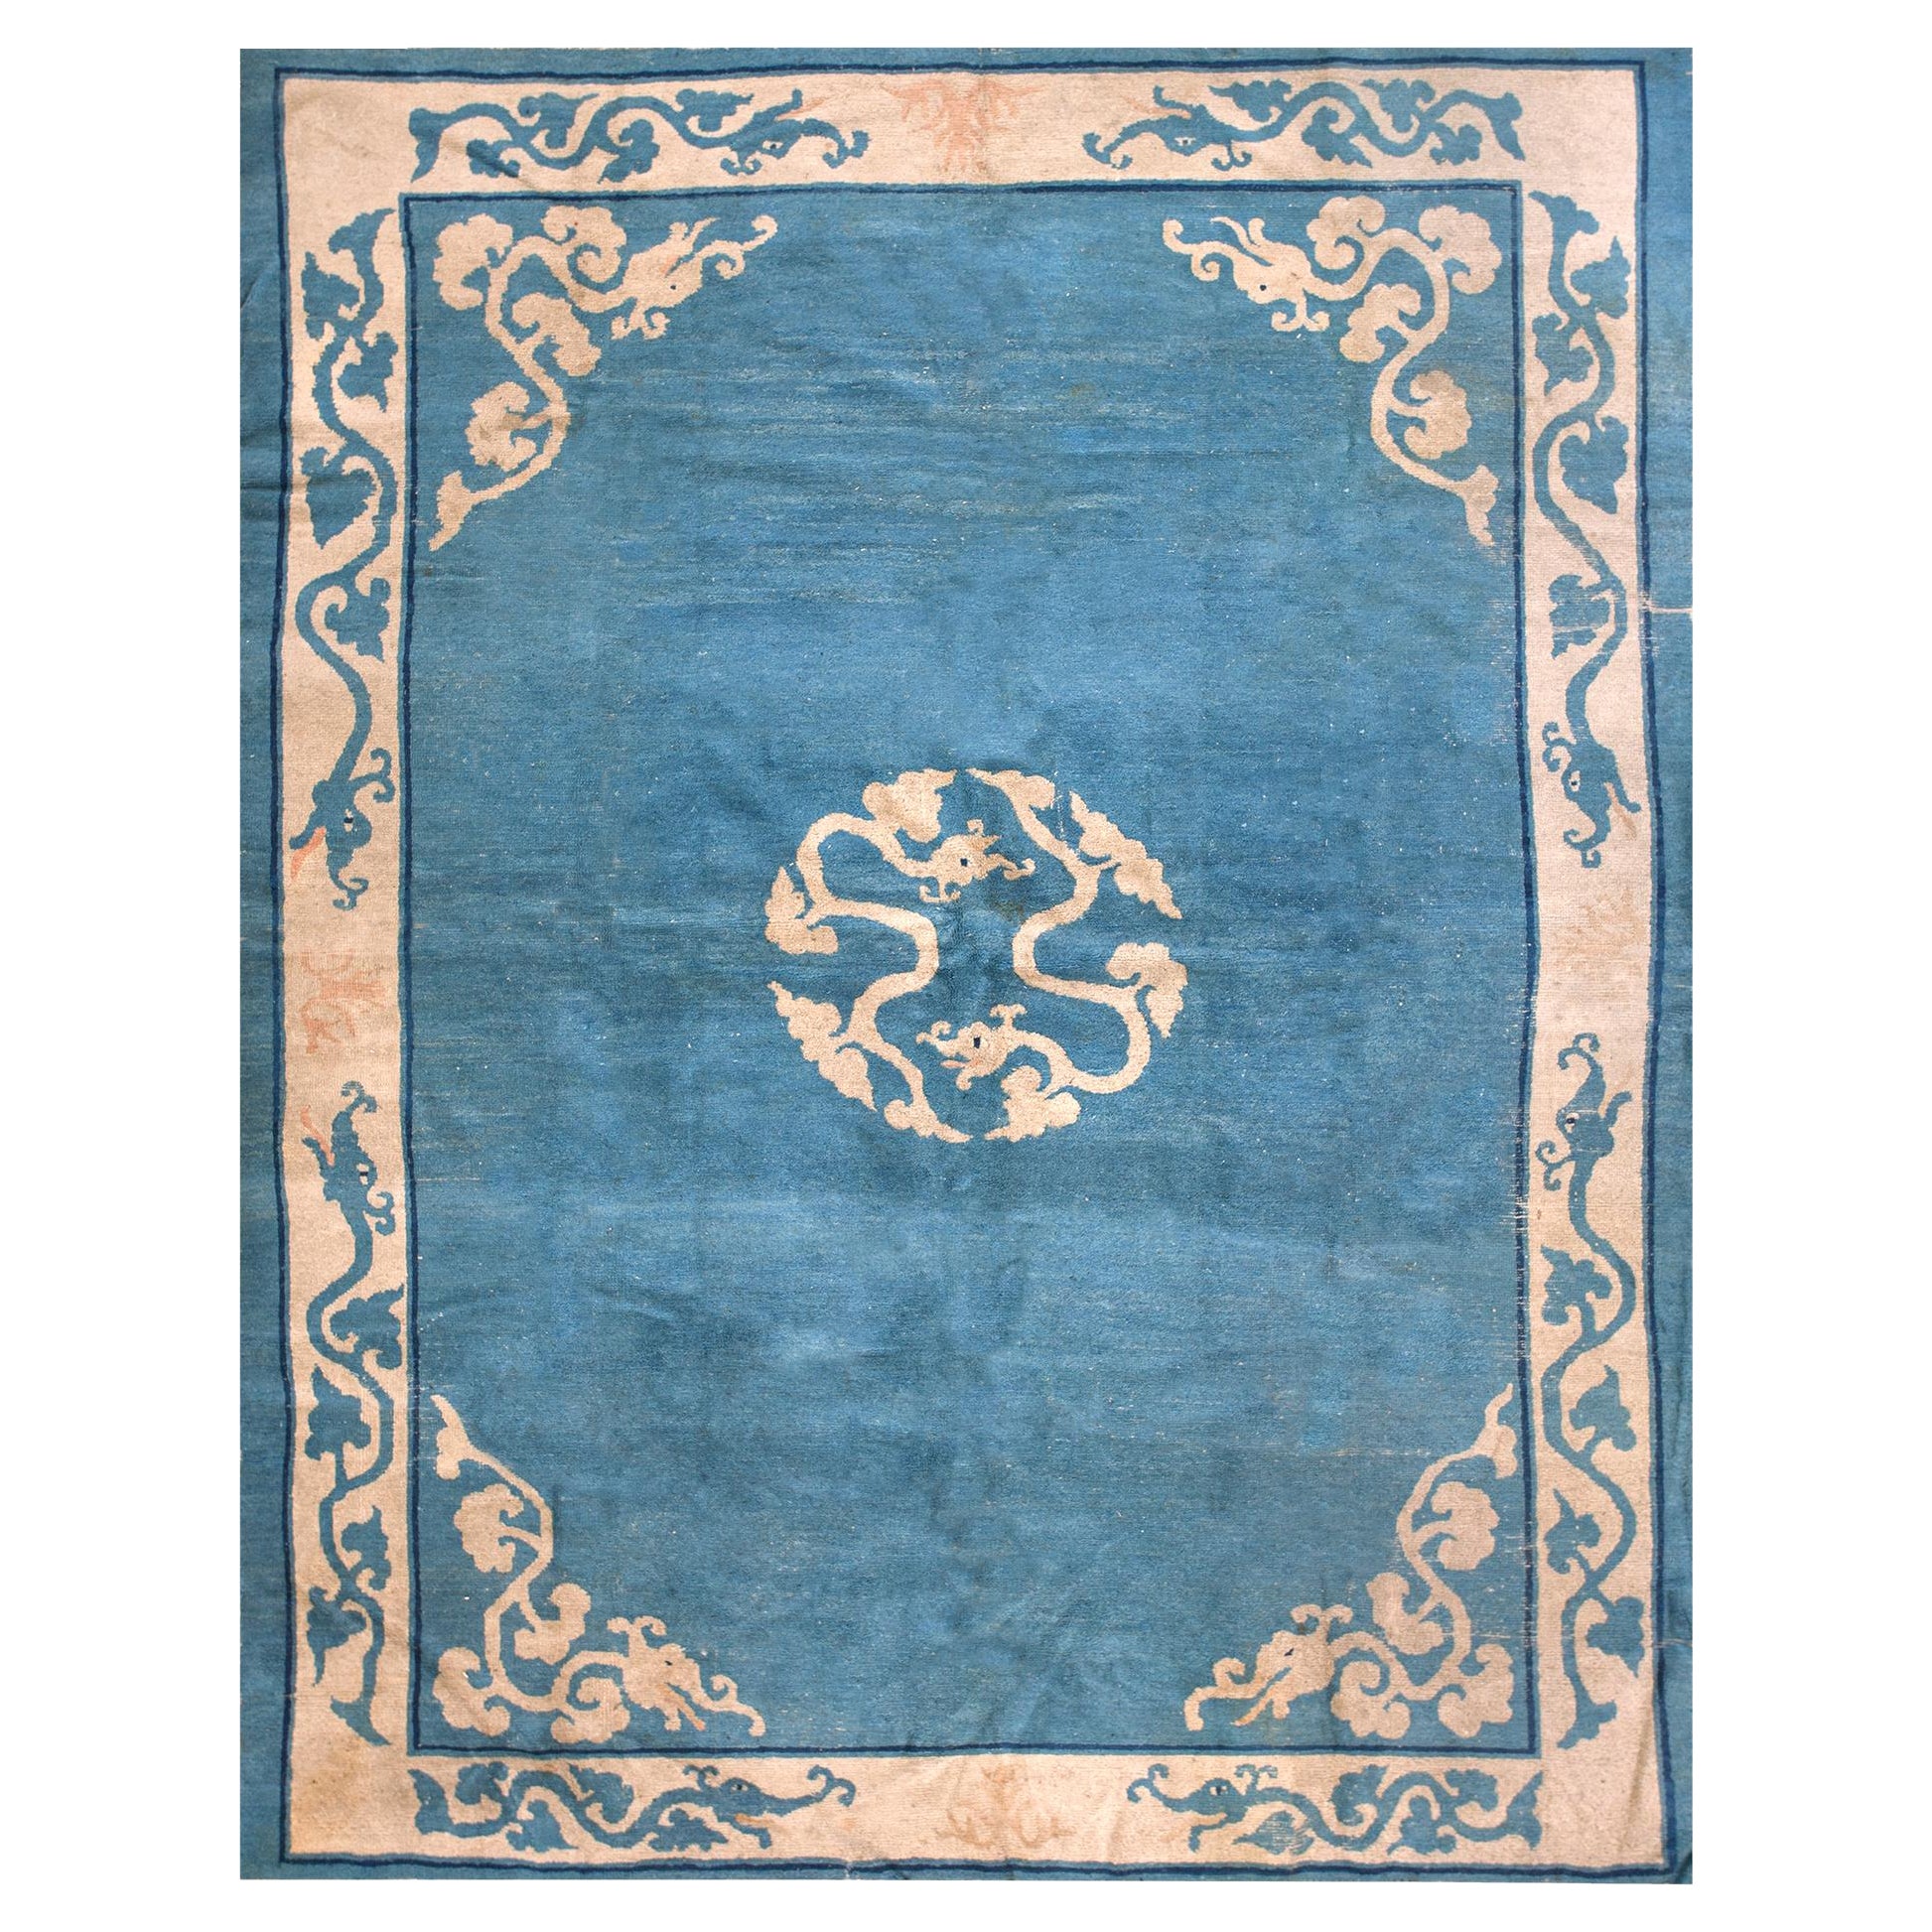 Late 19th Century Chinese Peking Carpet ( 7'3" x 9' - 220 x 274 )  For Sale